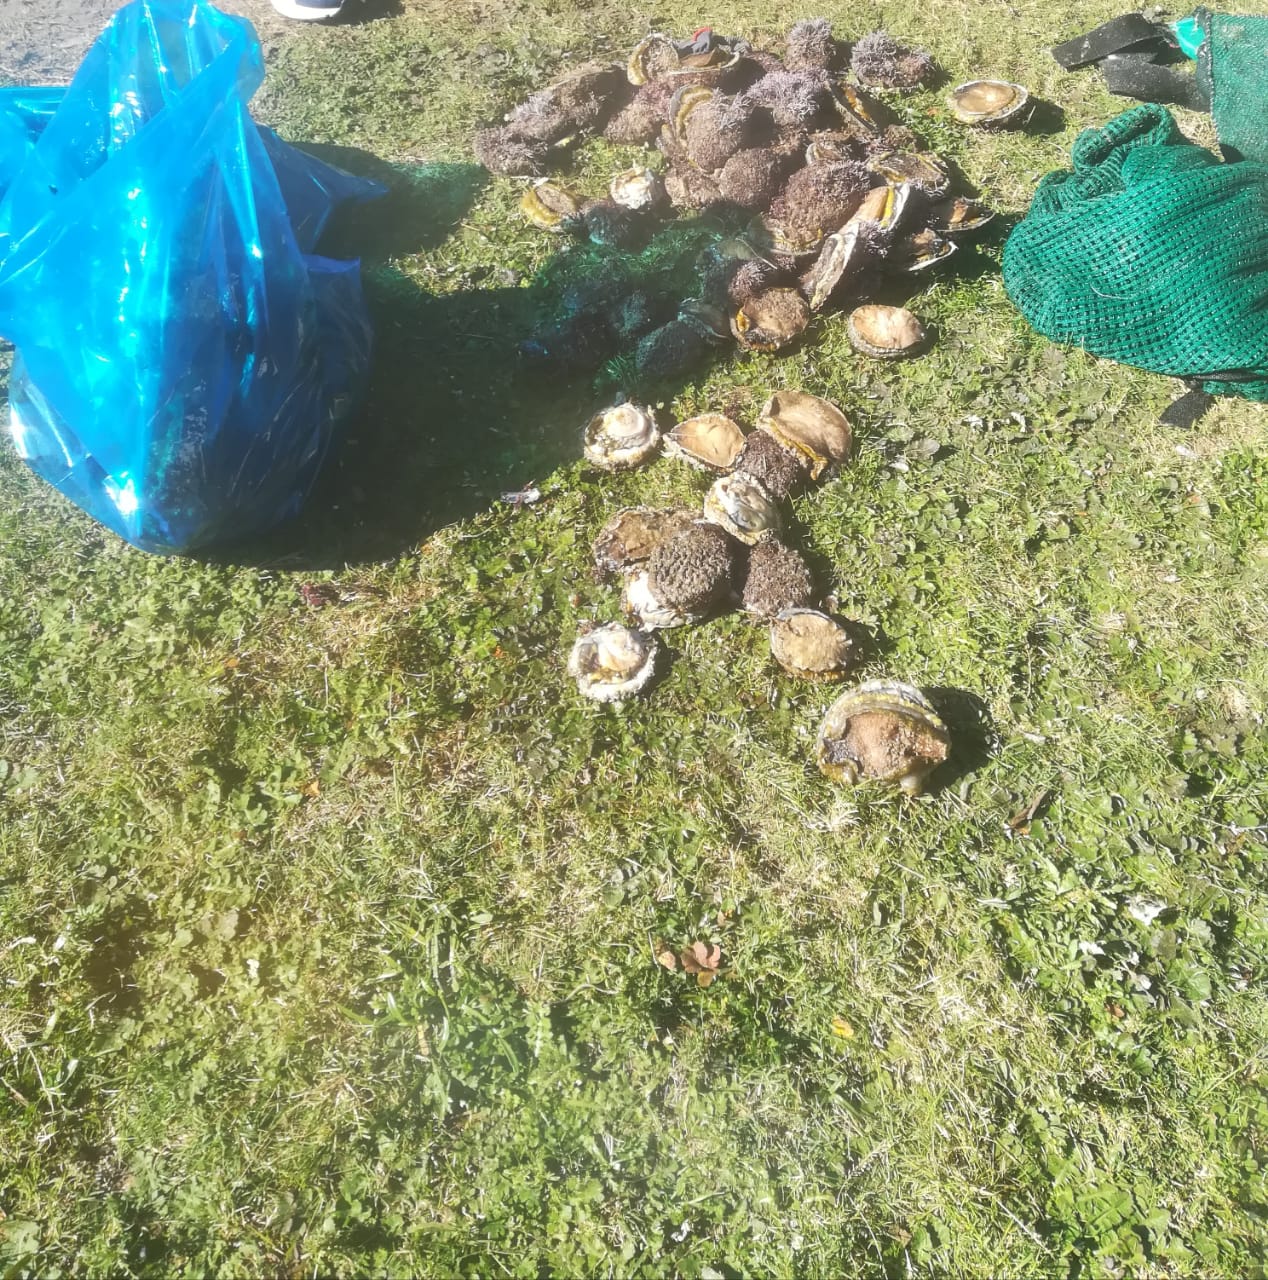 Two arrested for alleged abalone poaching in St Francis Bay - Eastern Cape